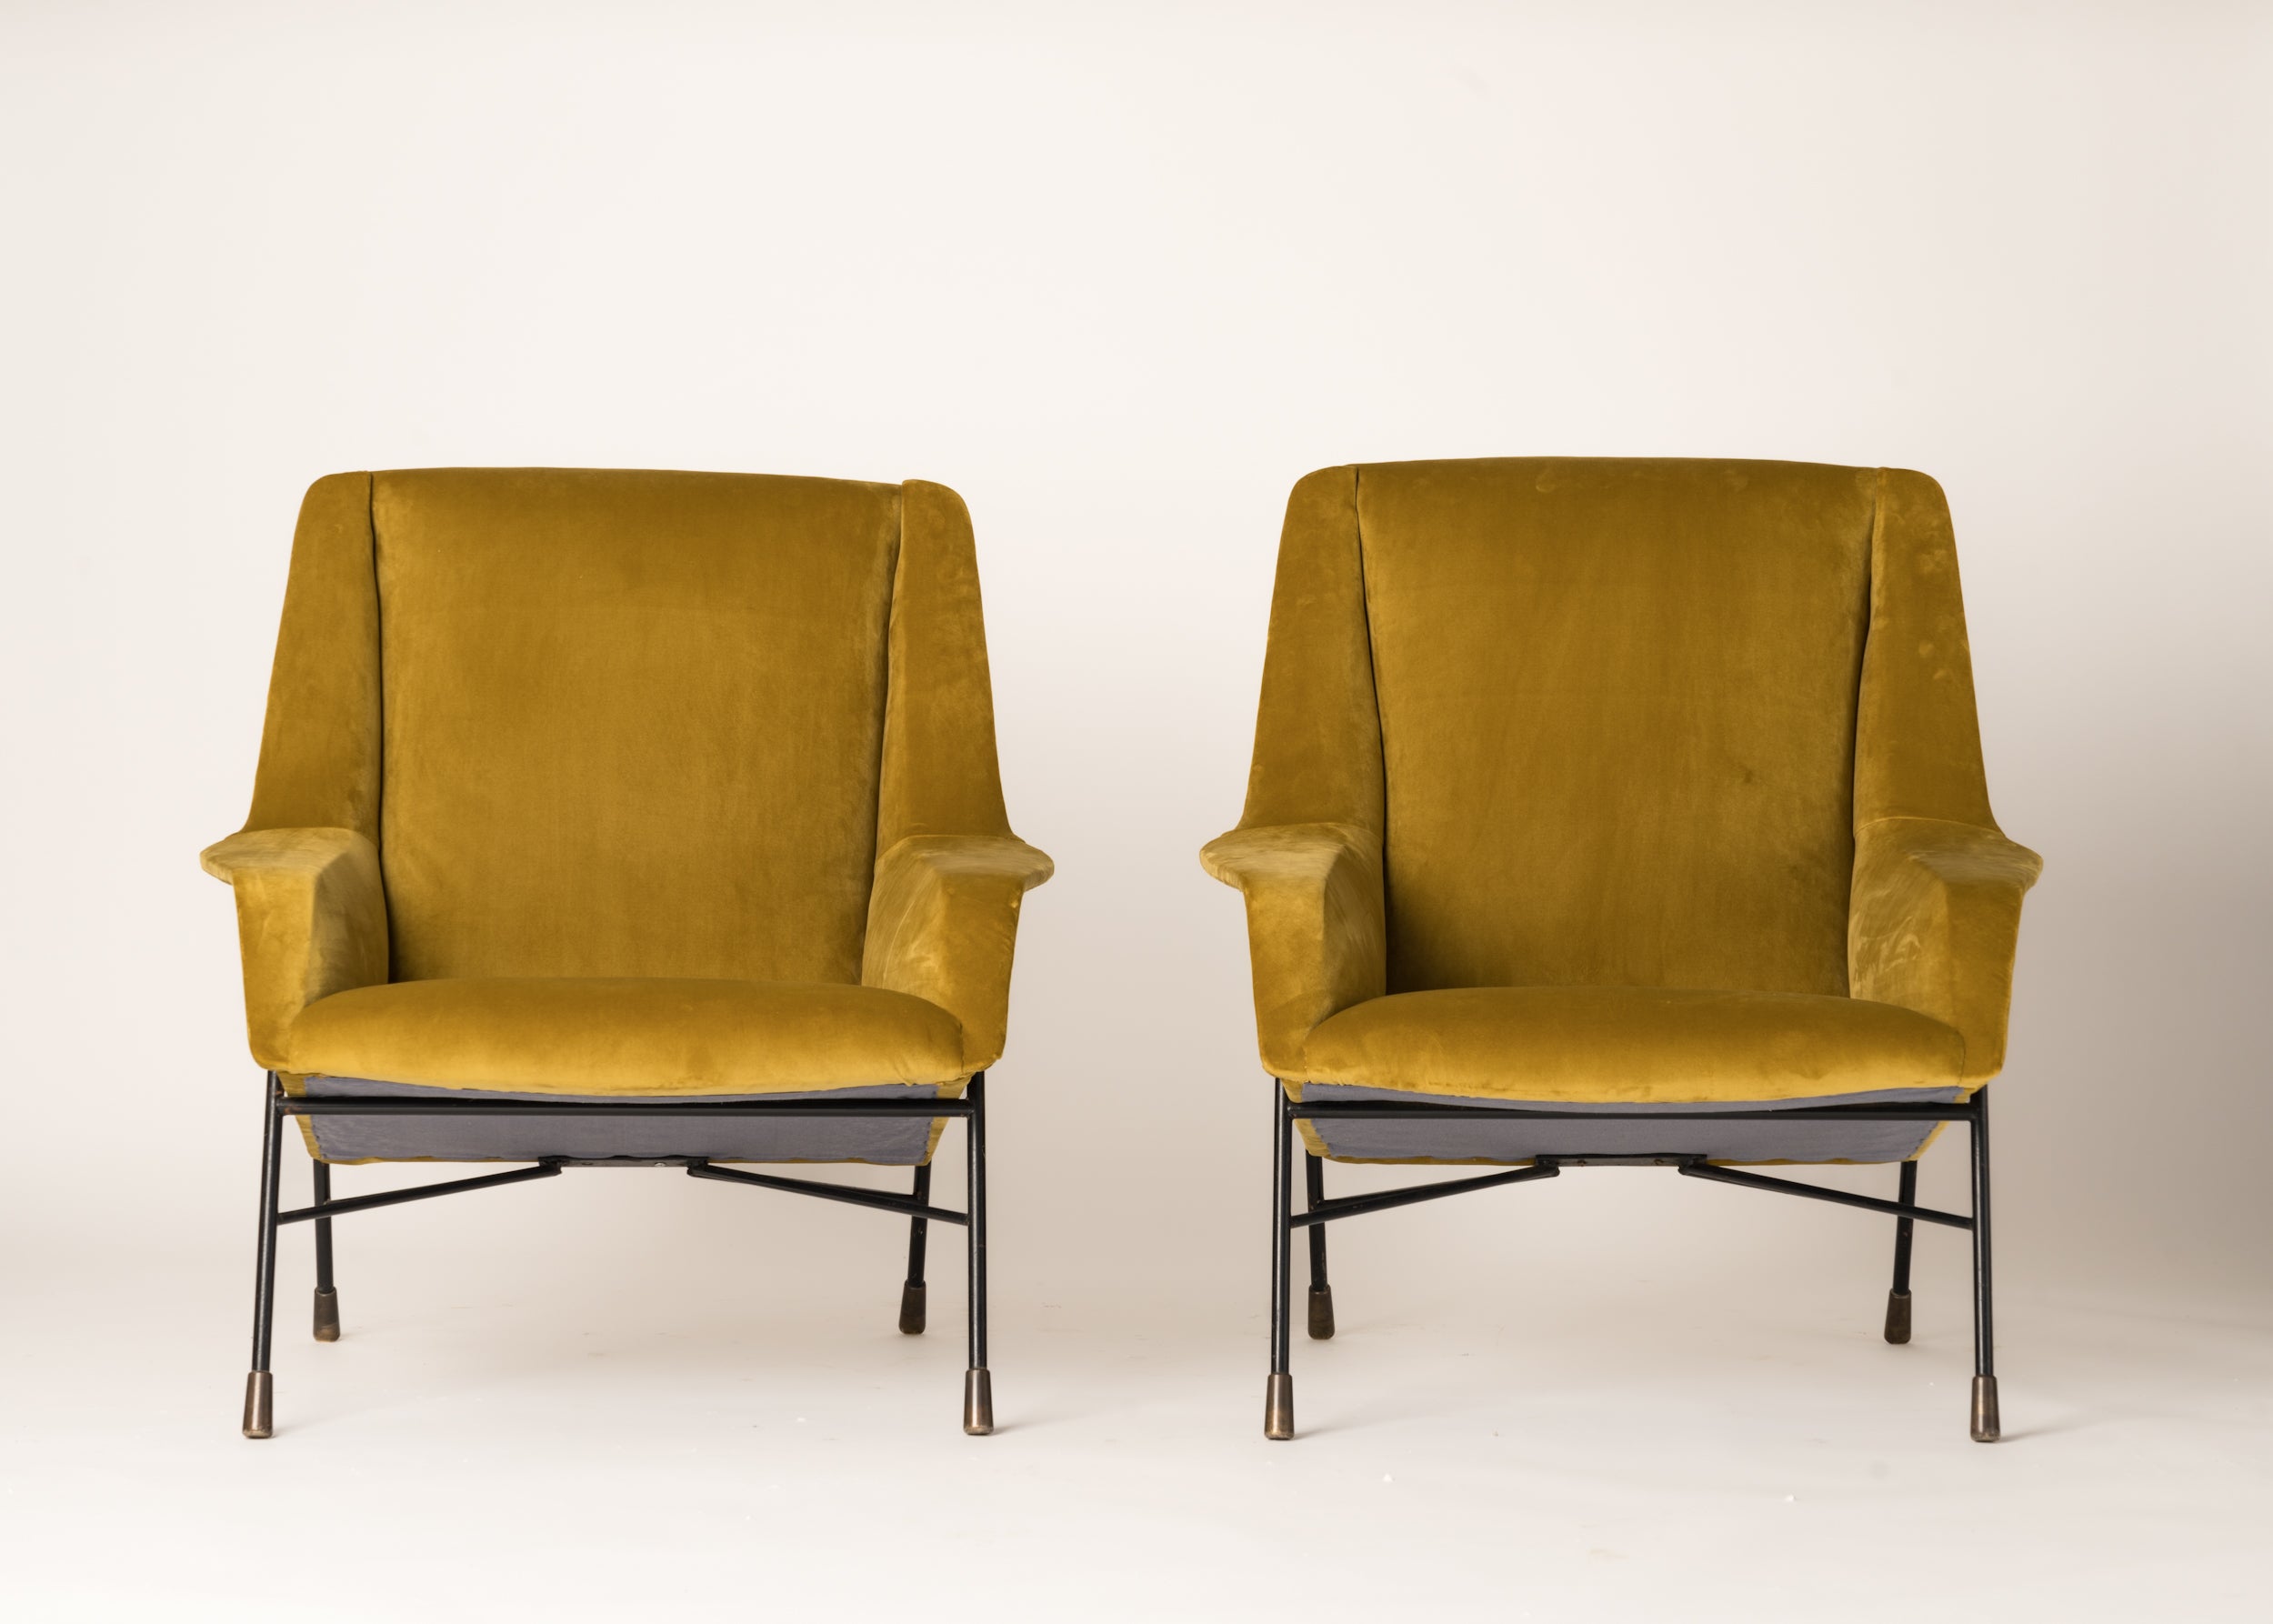 Pair of S12 Armchairs by Alfred Hendrickx for Belform, Belgium, 1958